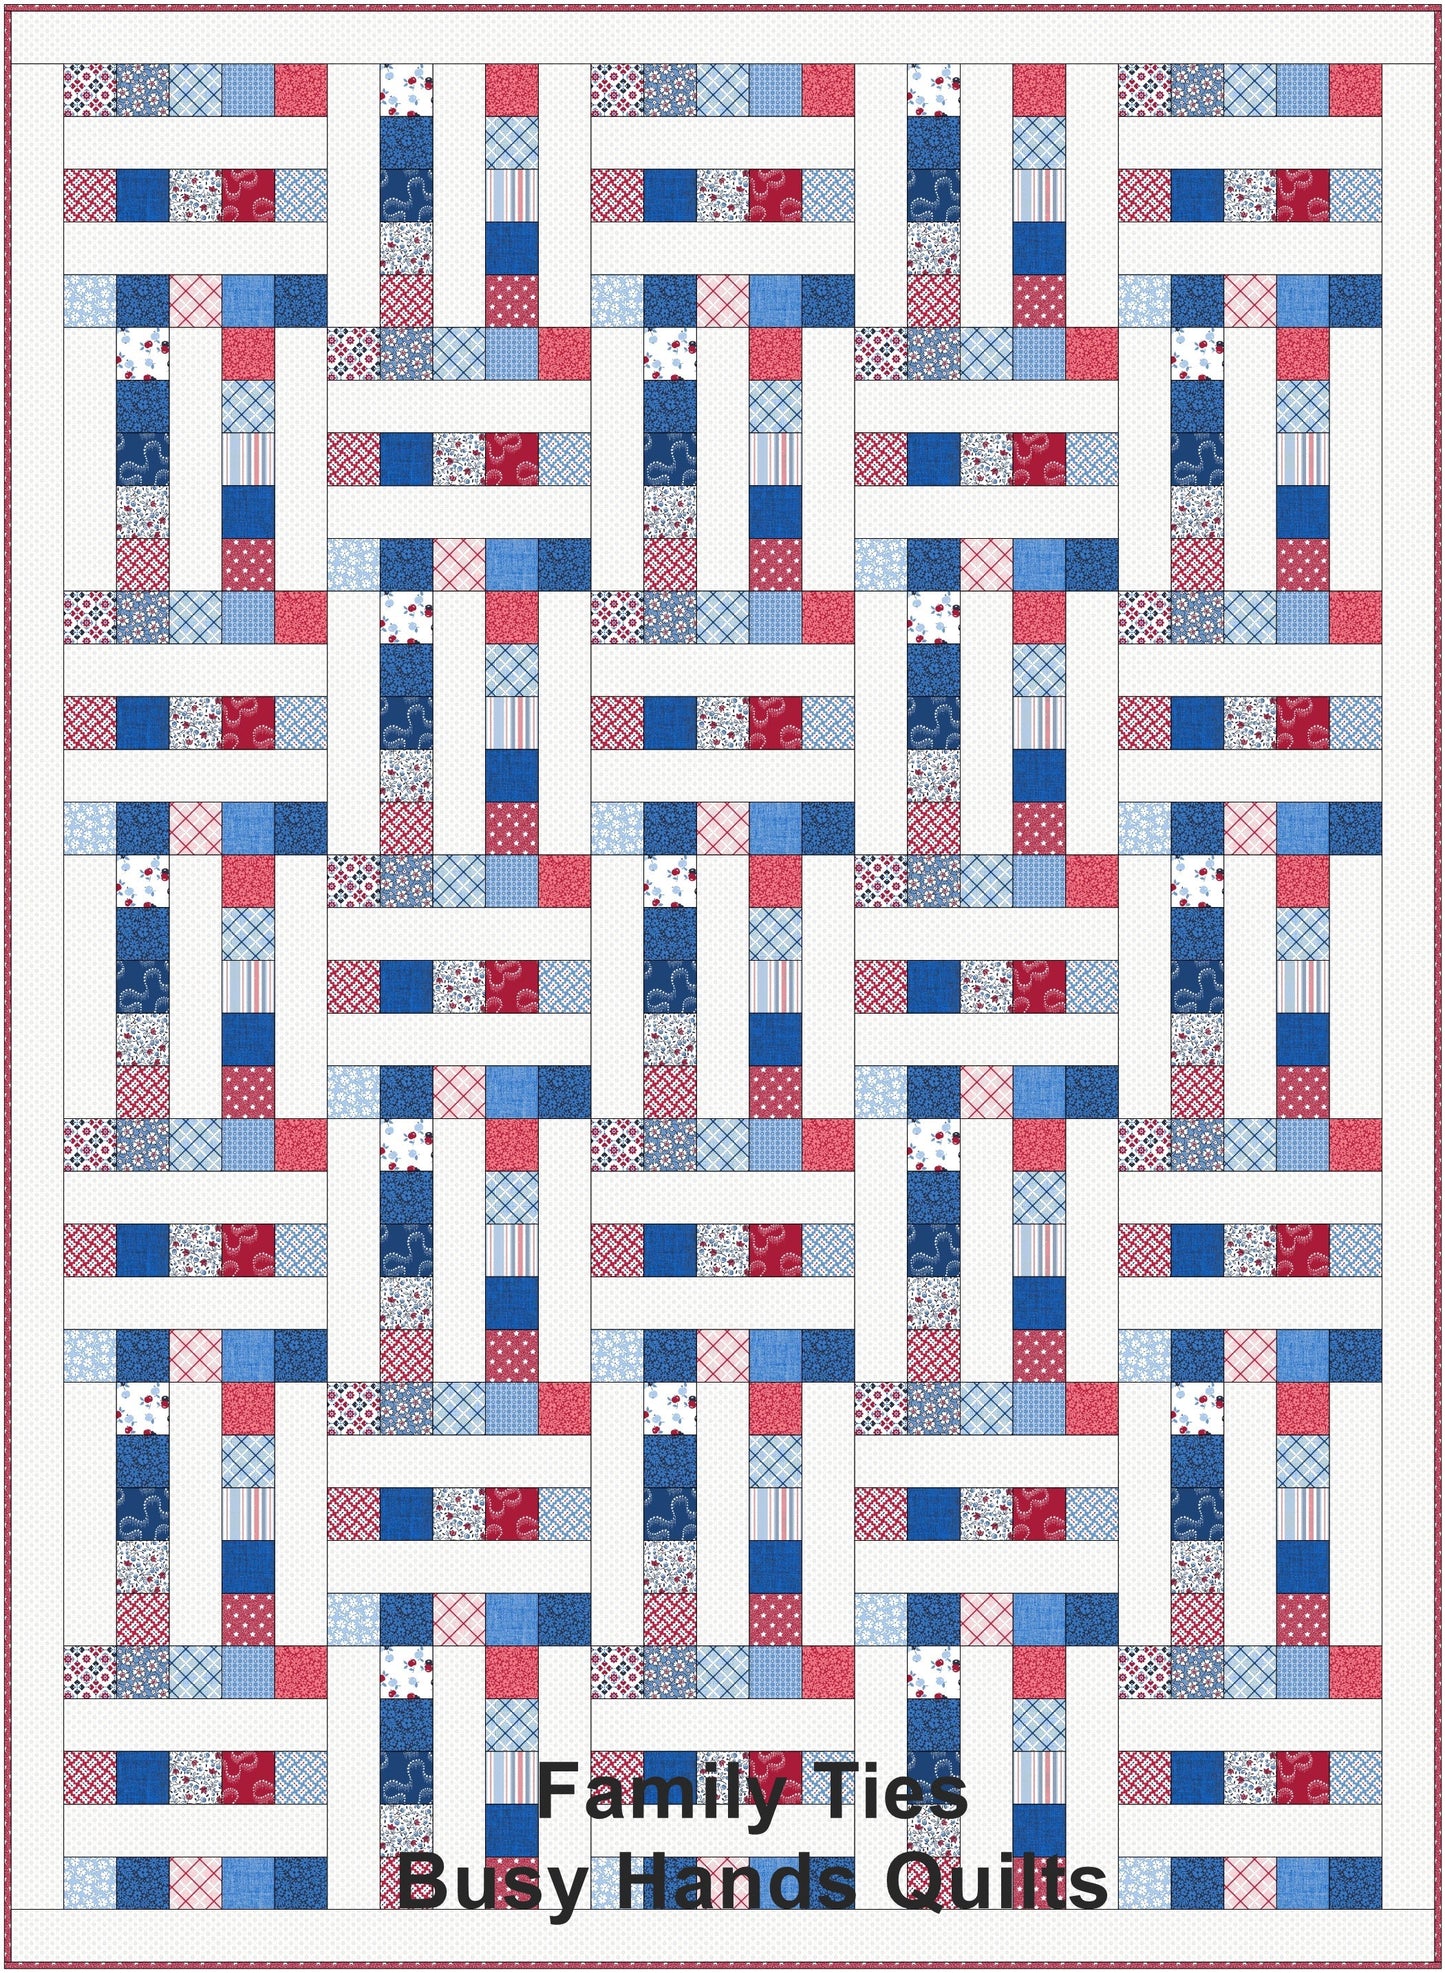 Family Ties Quilt Pattern PDF DOWNLOAD Busy Hands Quilts $12.99